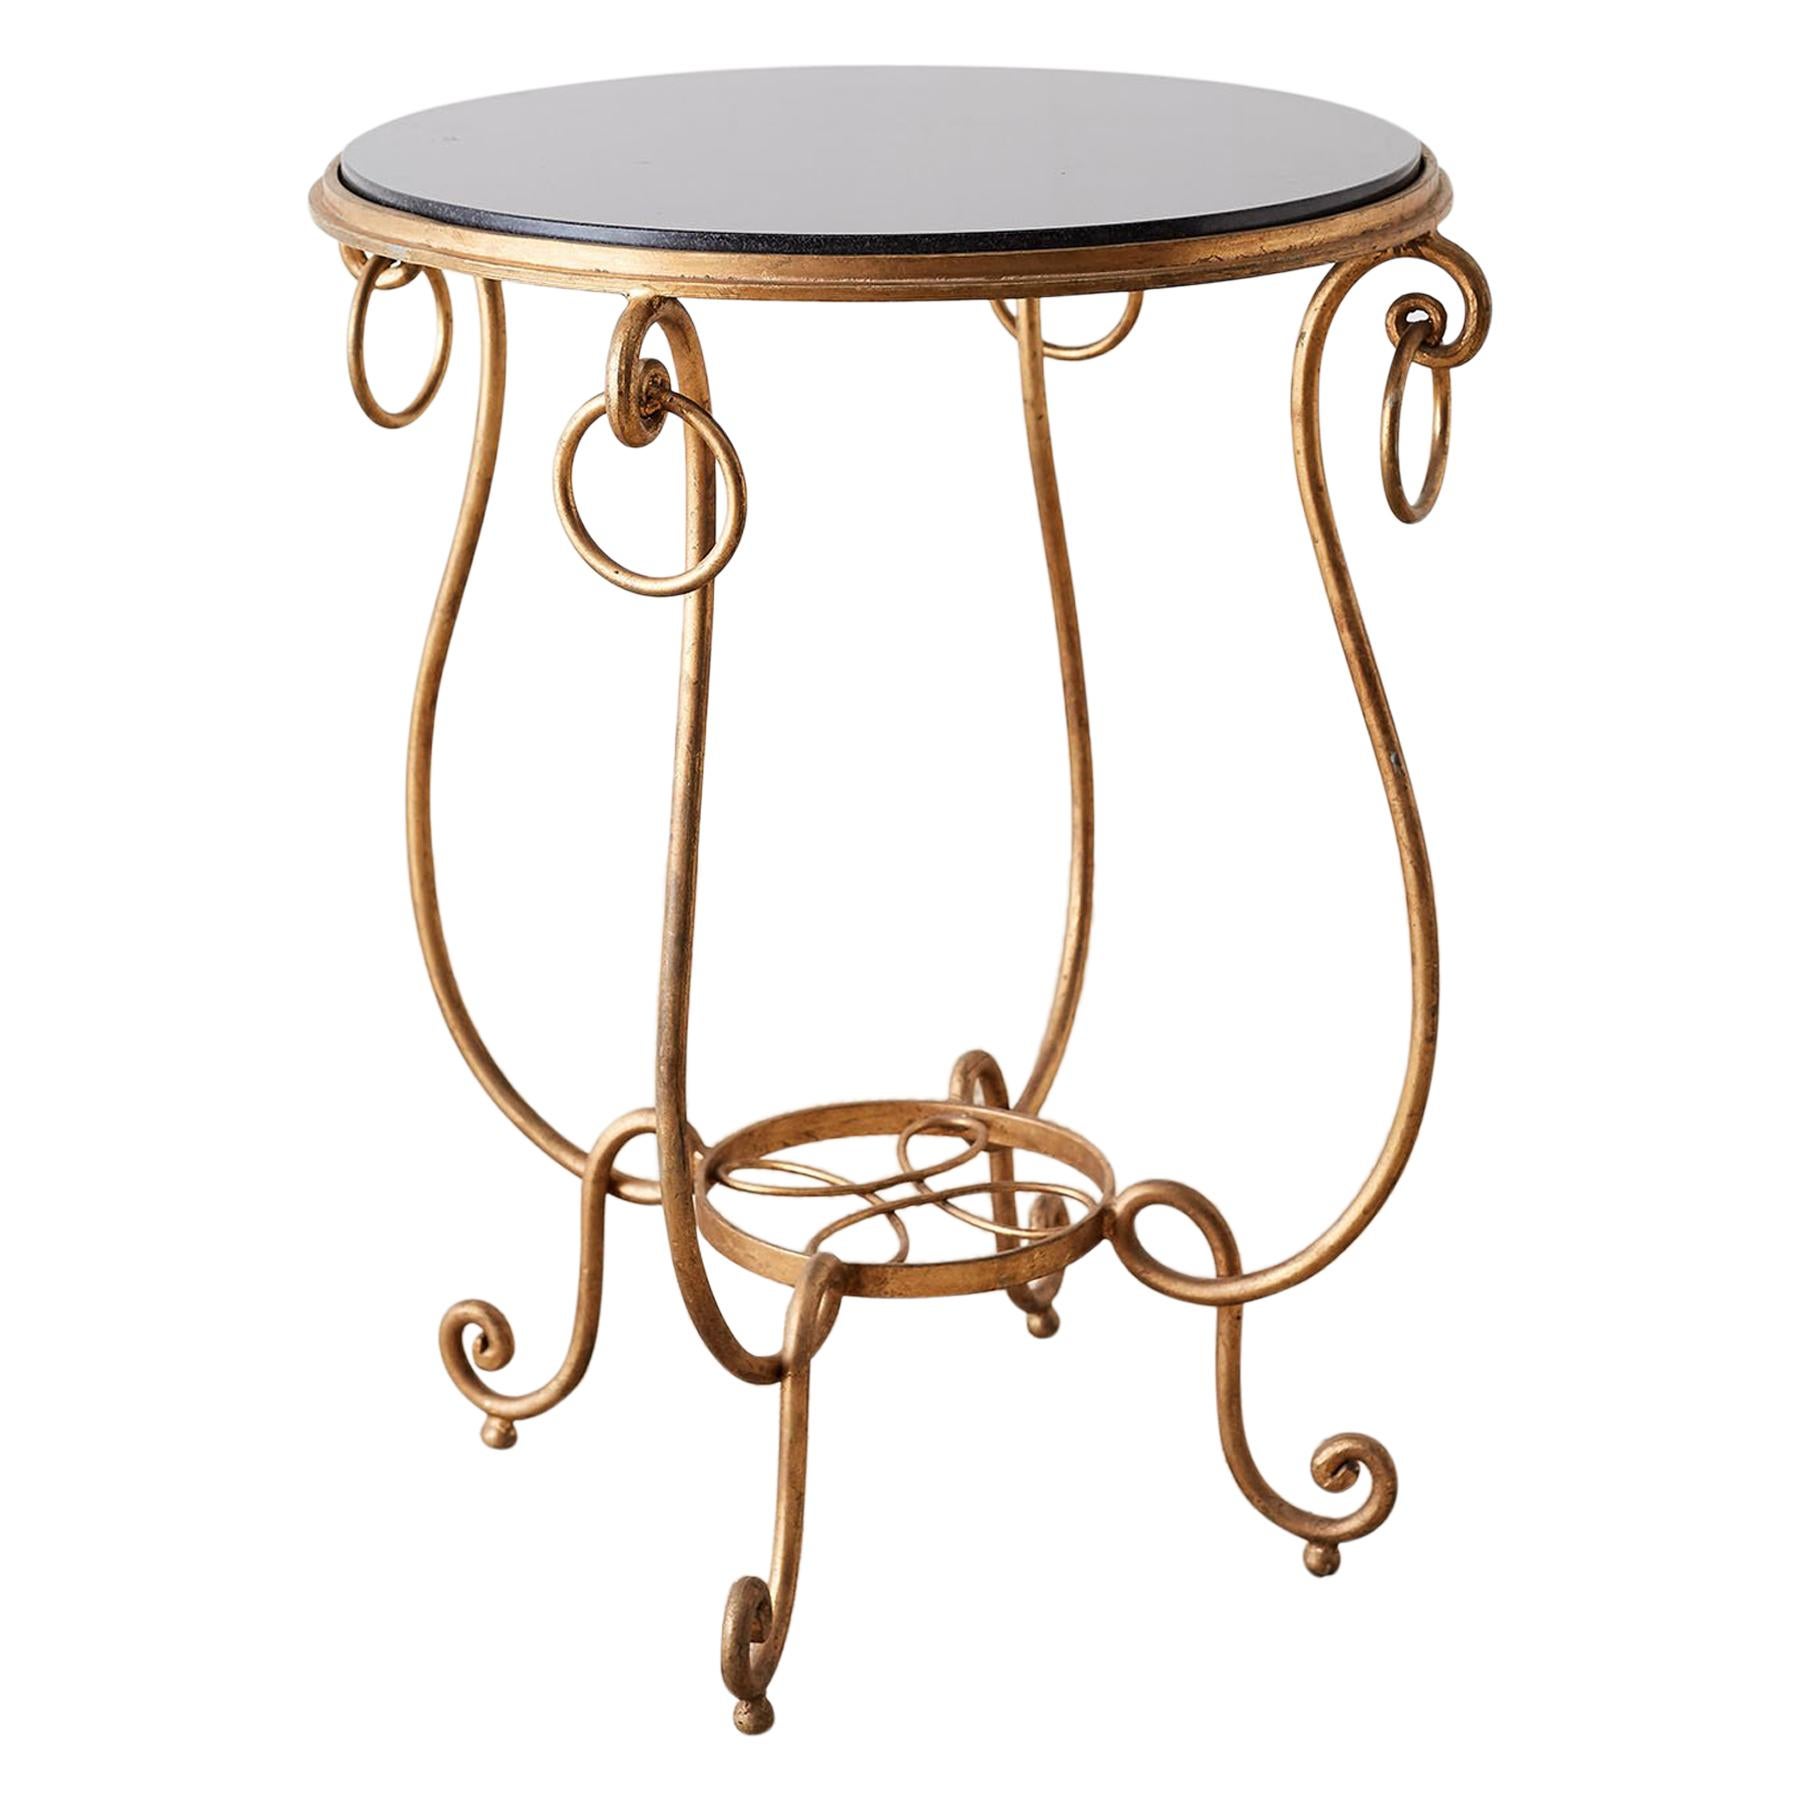 Rene Drouet Style Gilded Iron and Granite Table For Sale